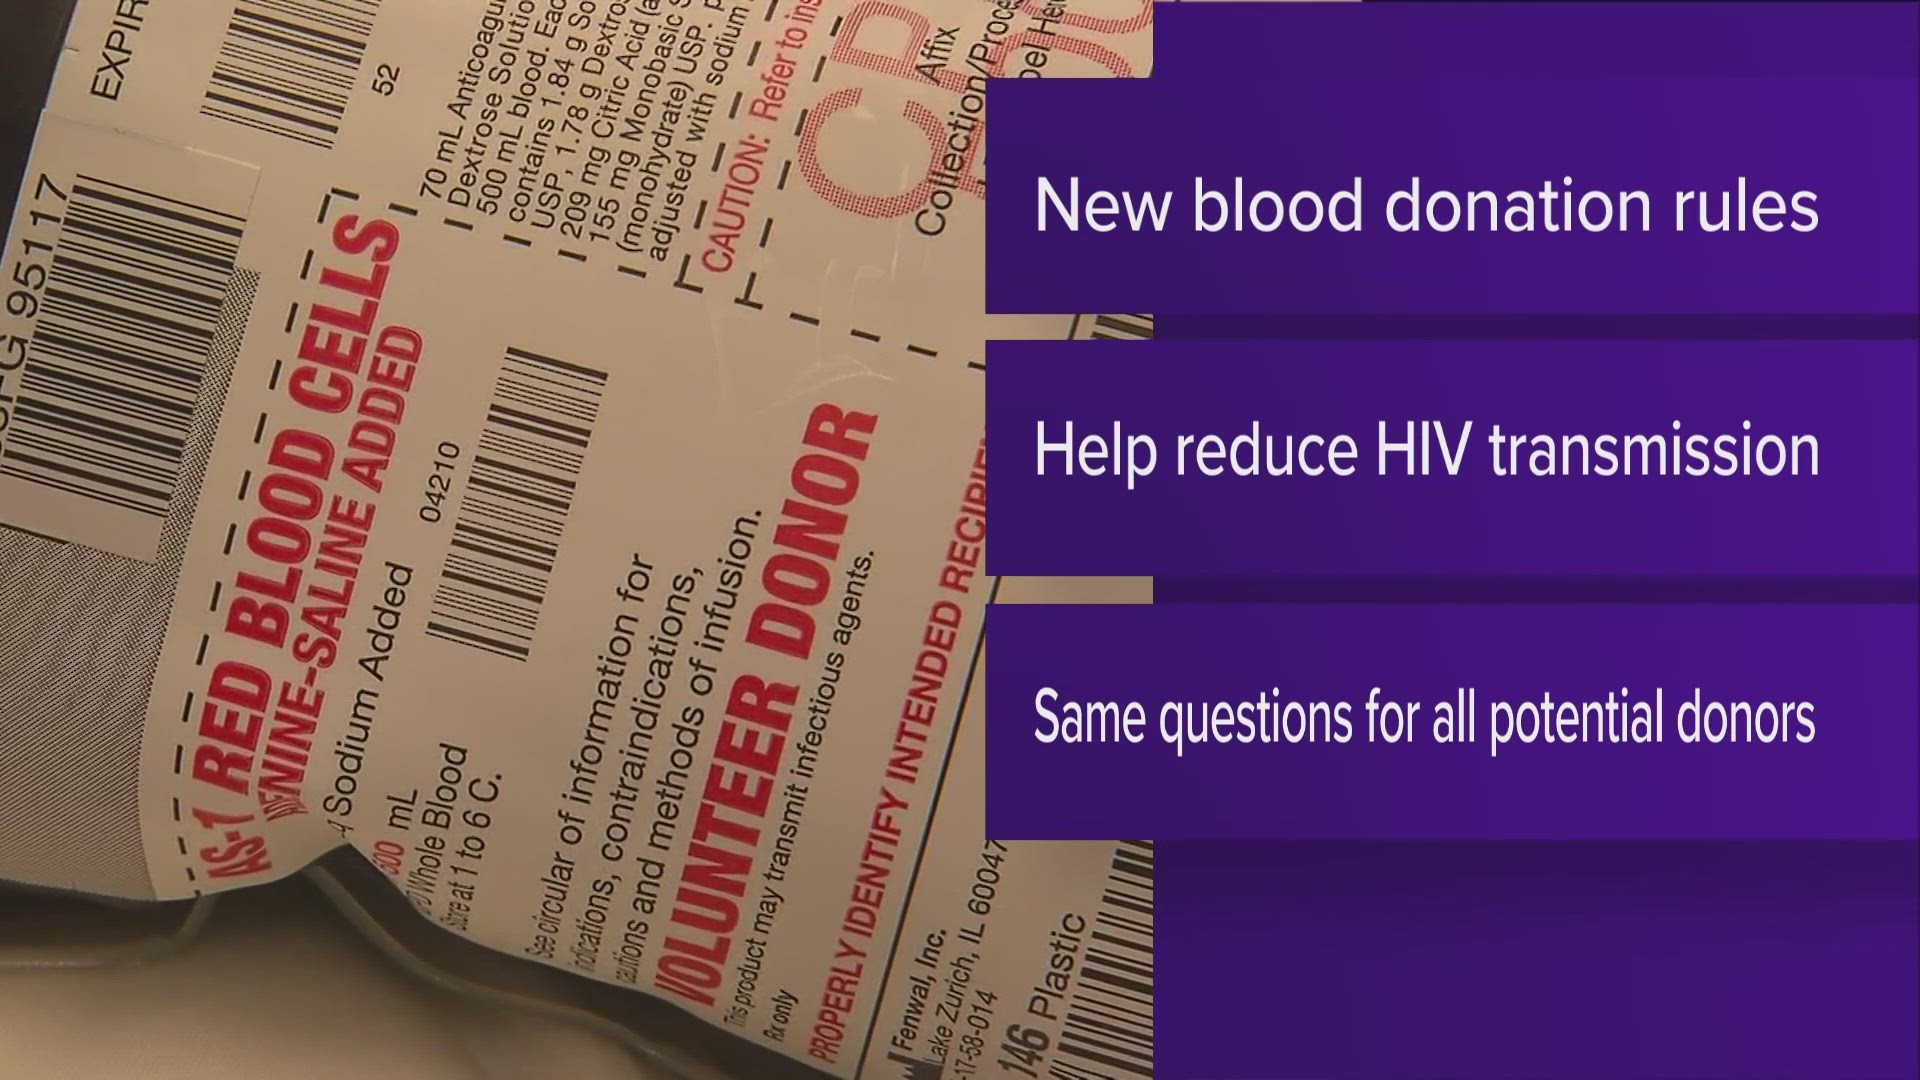 All potential donors will be screened with a new questionnaire that evaluates individual risks for HIV based on sexual behavior, recent partners and other factors.